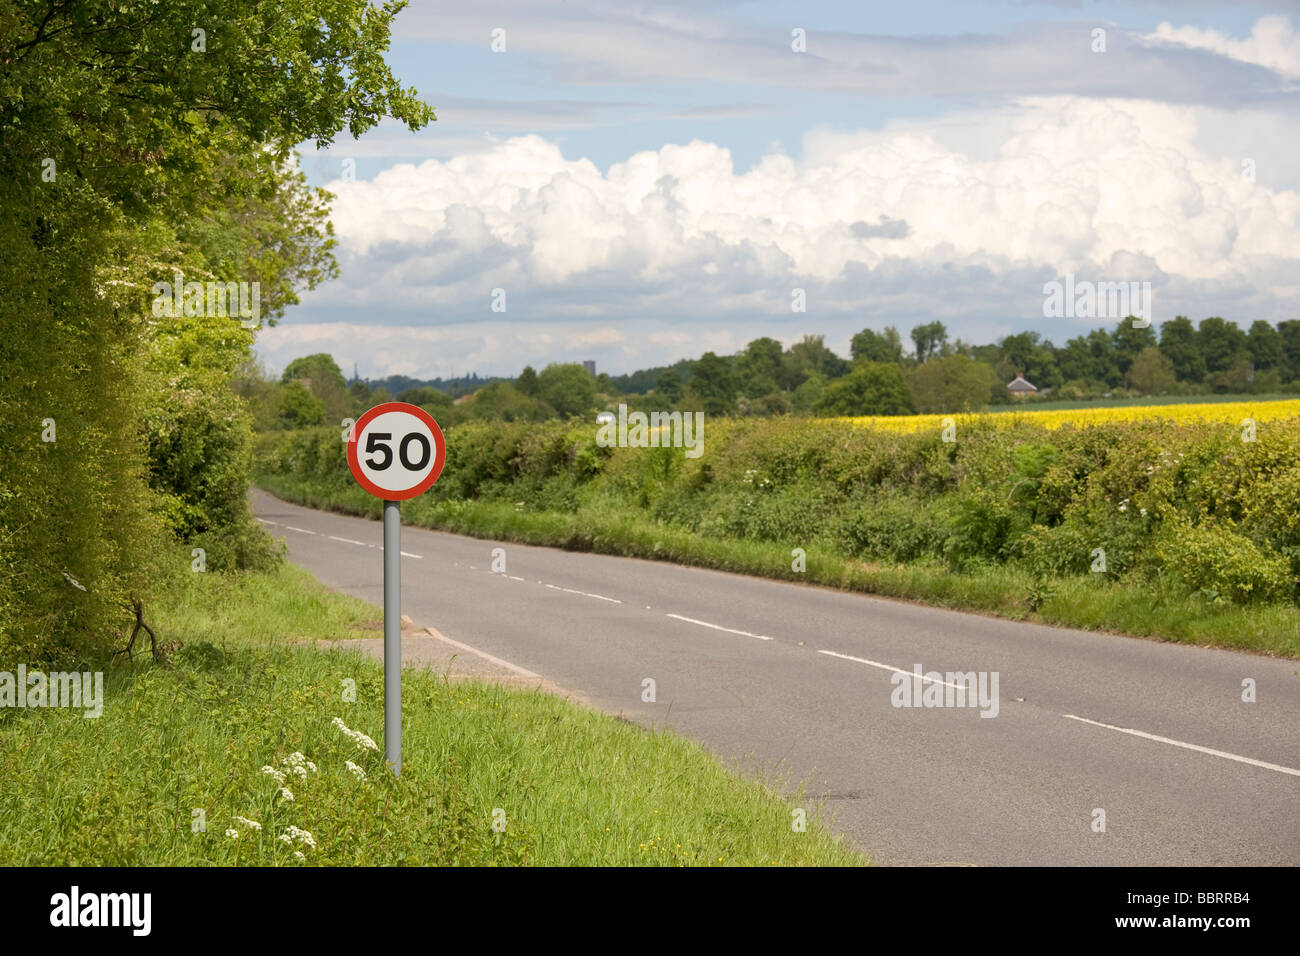 50 MPH speed limit sign on rural road Stock Photo